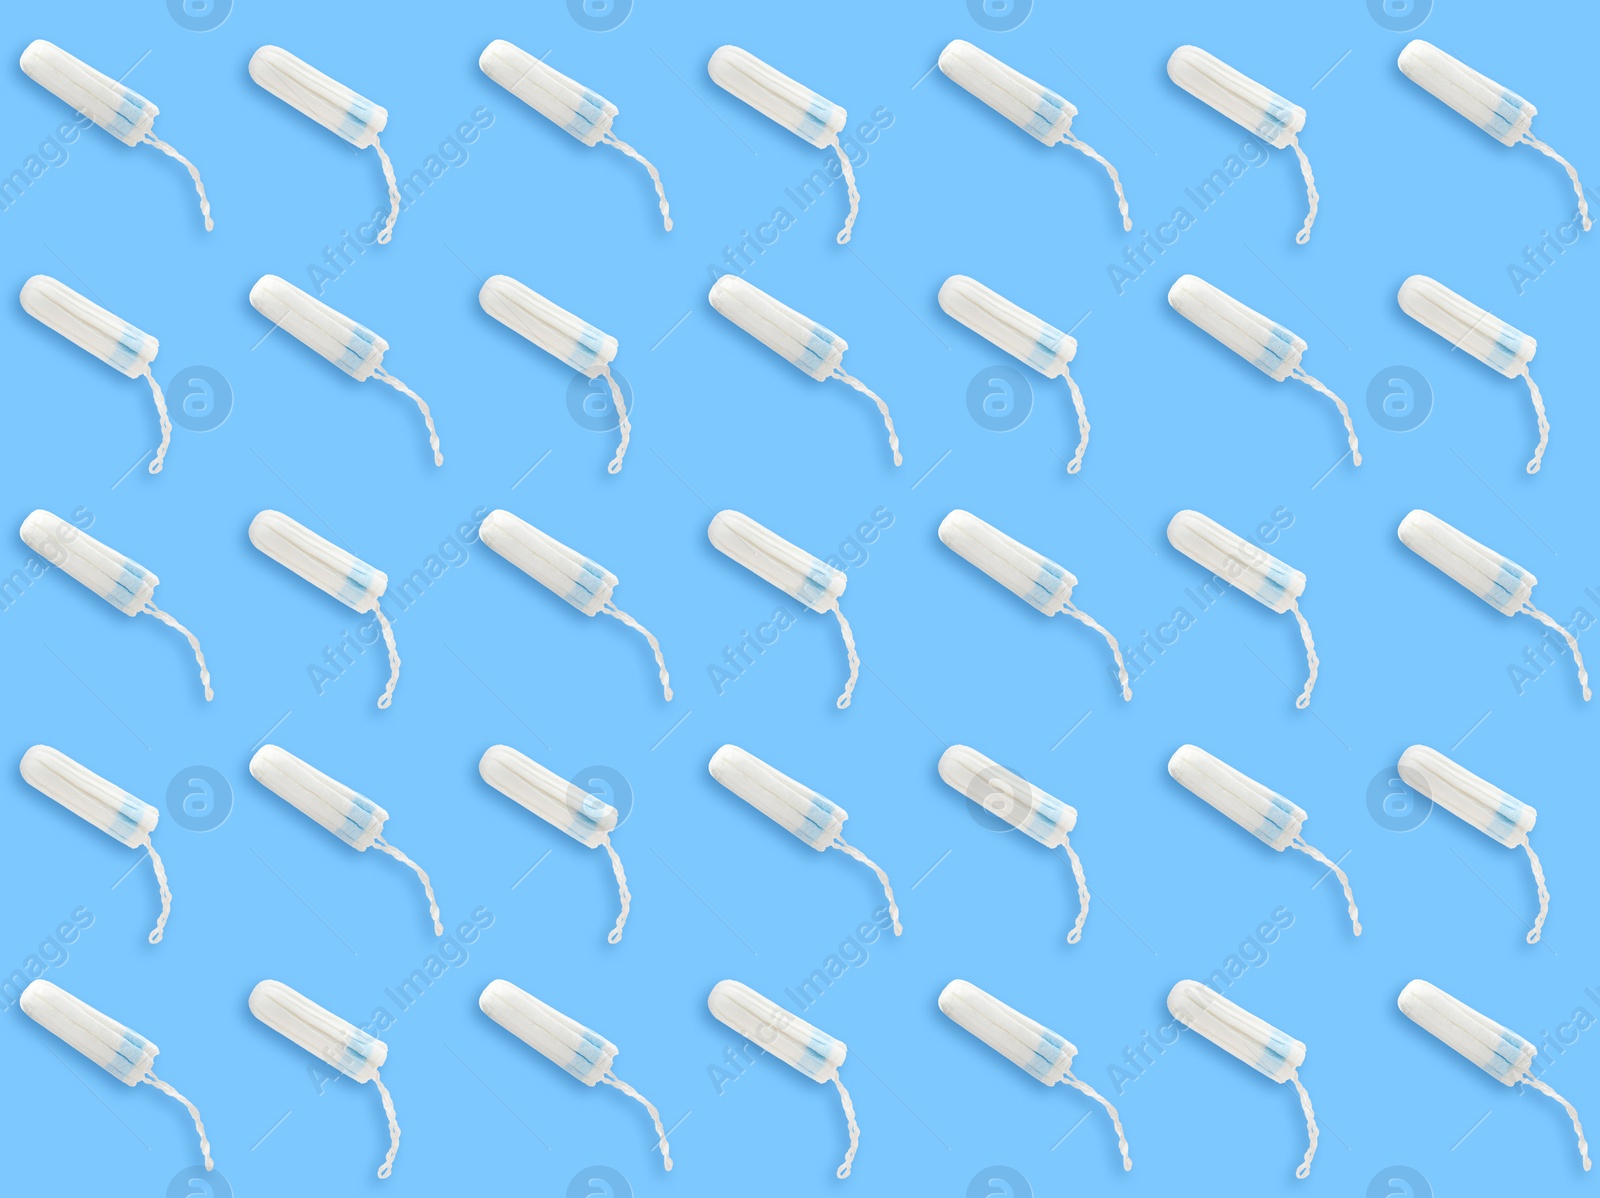 Image of Many tampons on light blue background, flat lay 